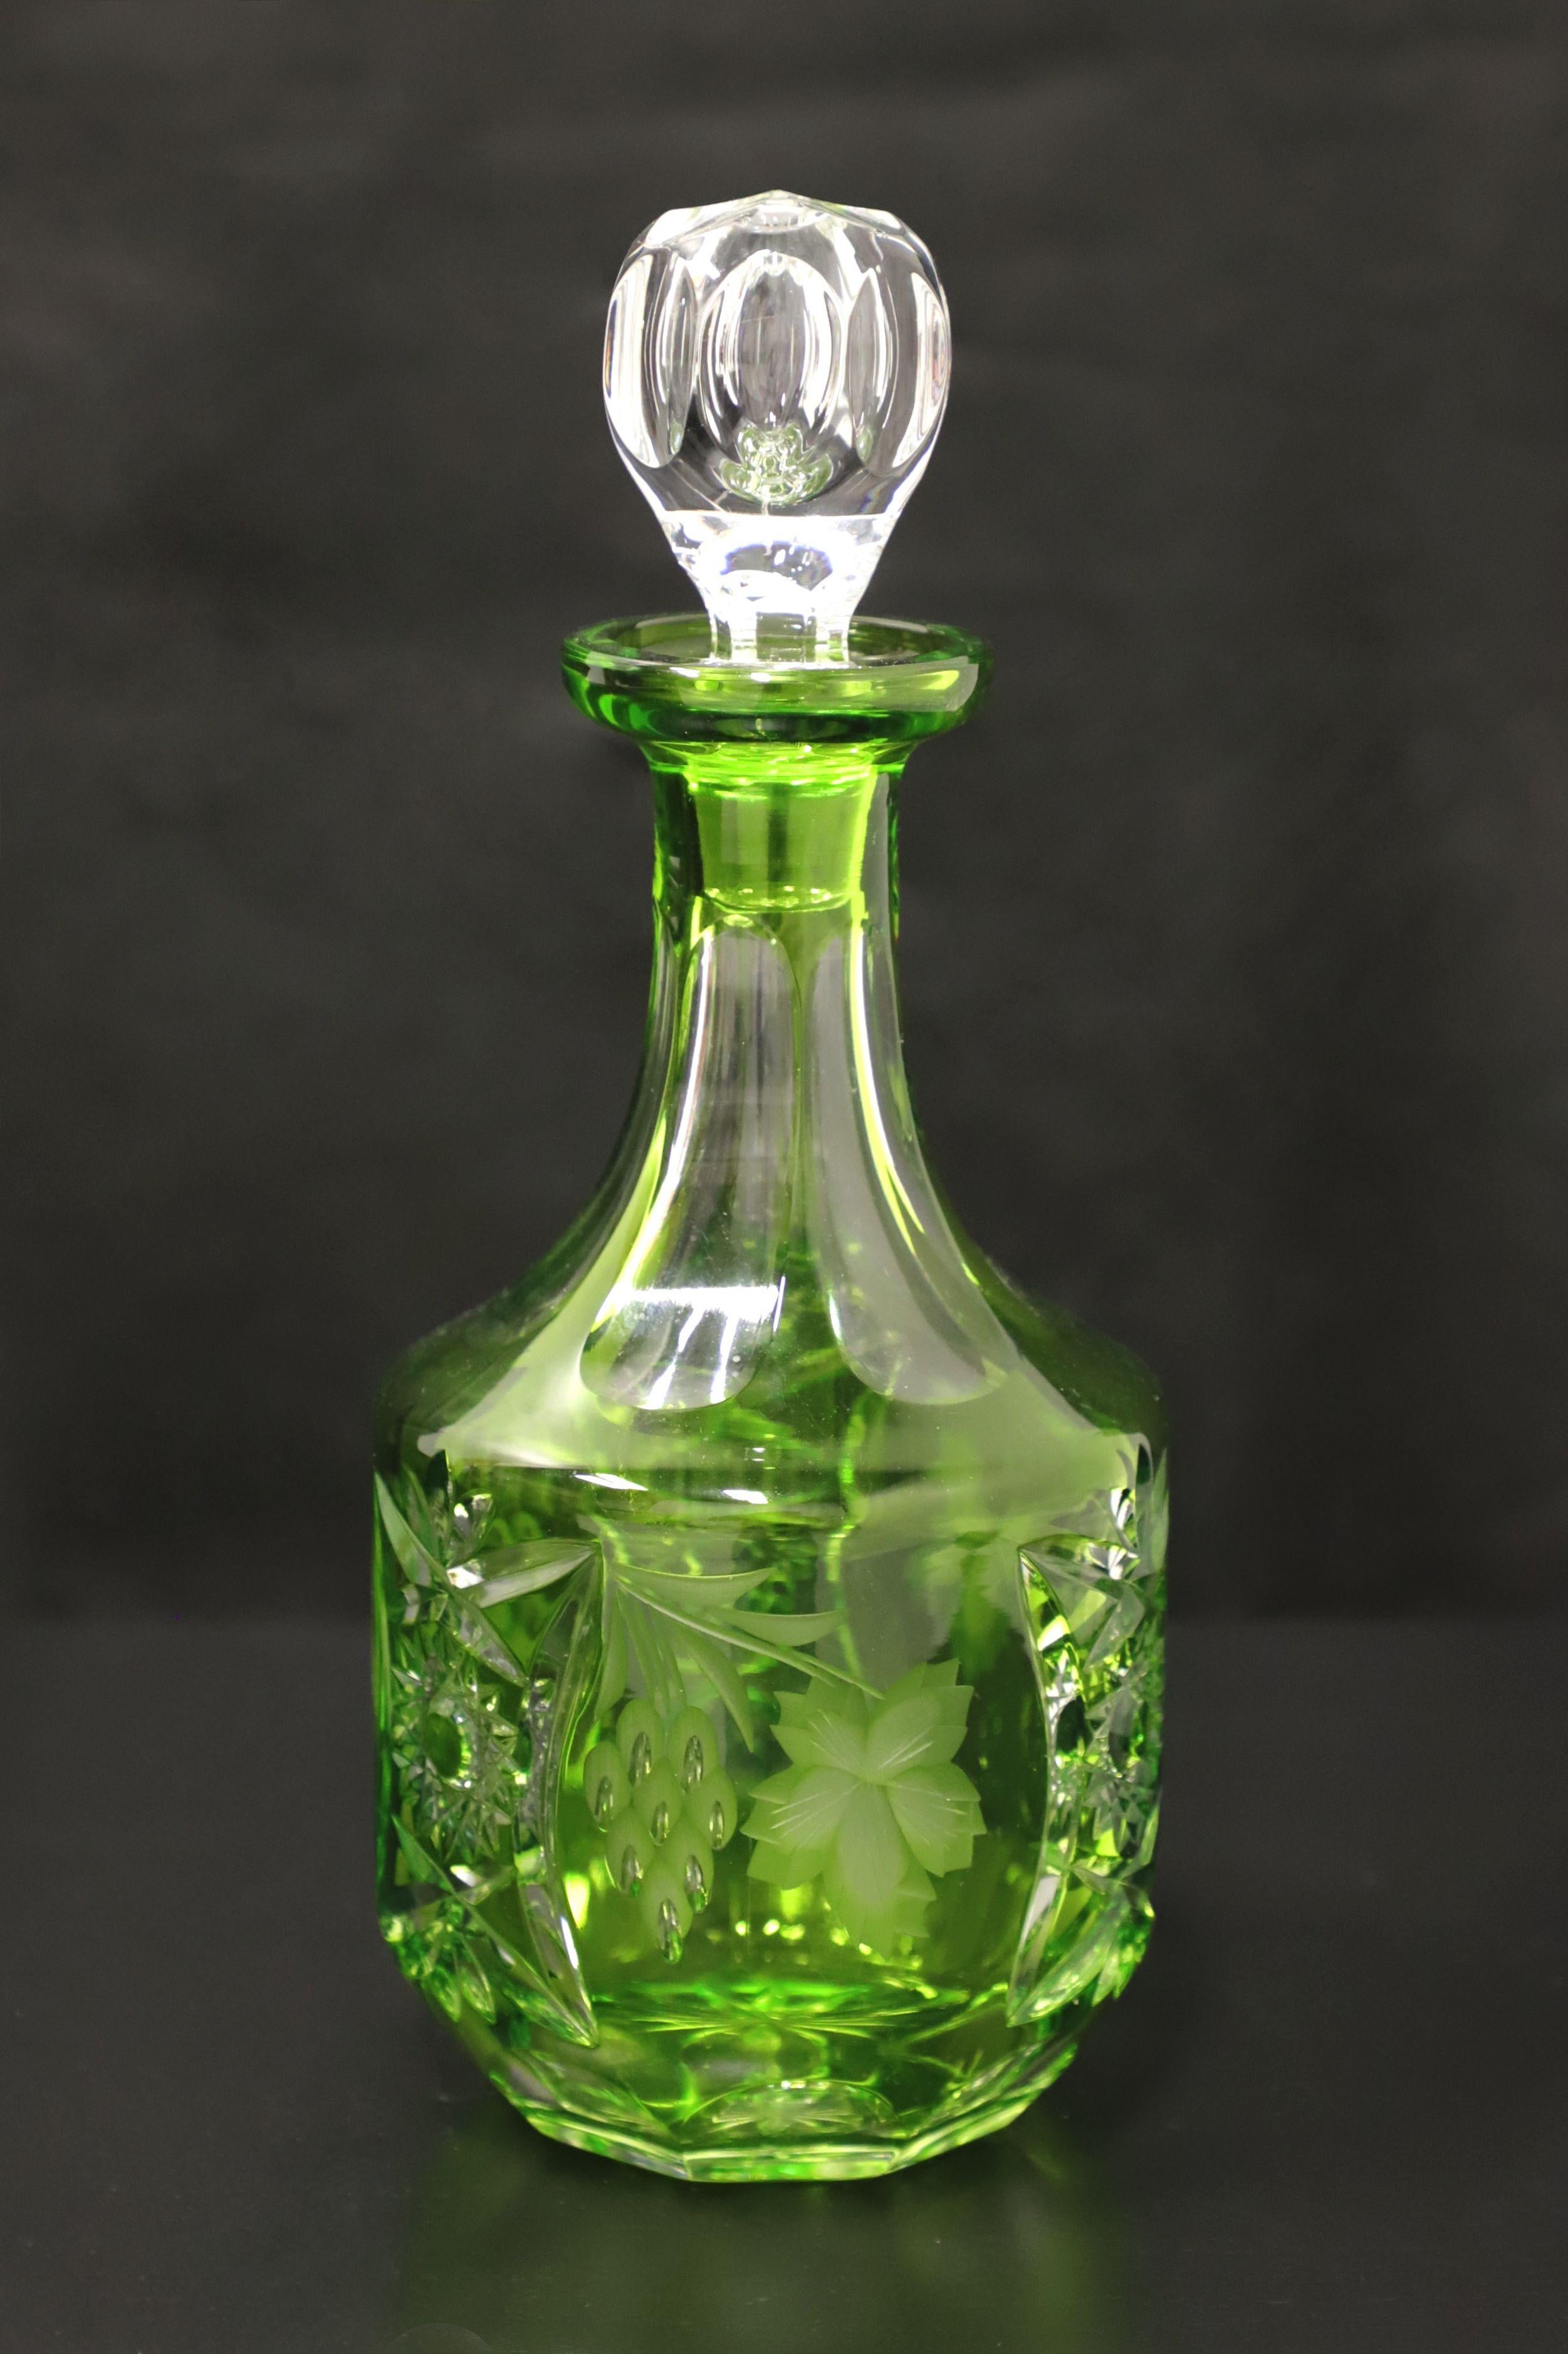 A Mid 20th Century crystal decanter. Emerald green cut decanter with alternating star and grapes with leaves motifs. Clear cut round stopper. Origin unknown, most likely the USA.

Measures: 4.5 W 4.5 D 10.75 H, Weighs Approximately: 2